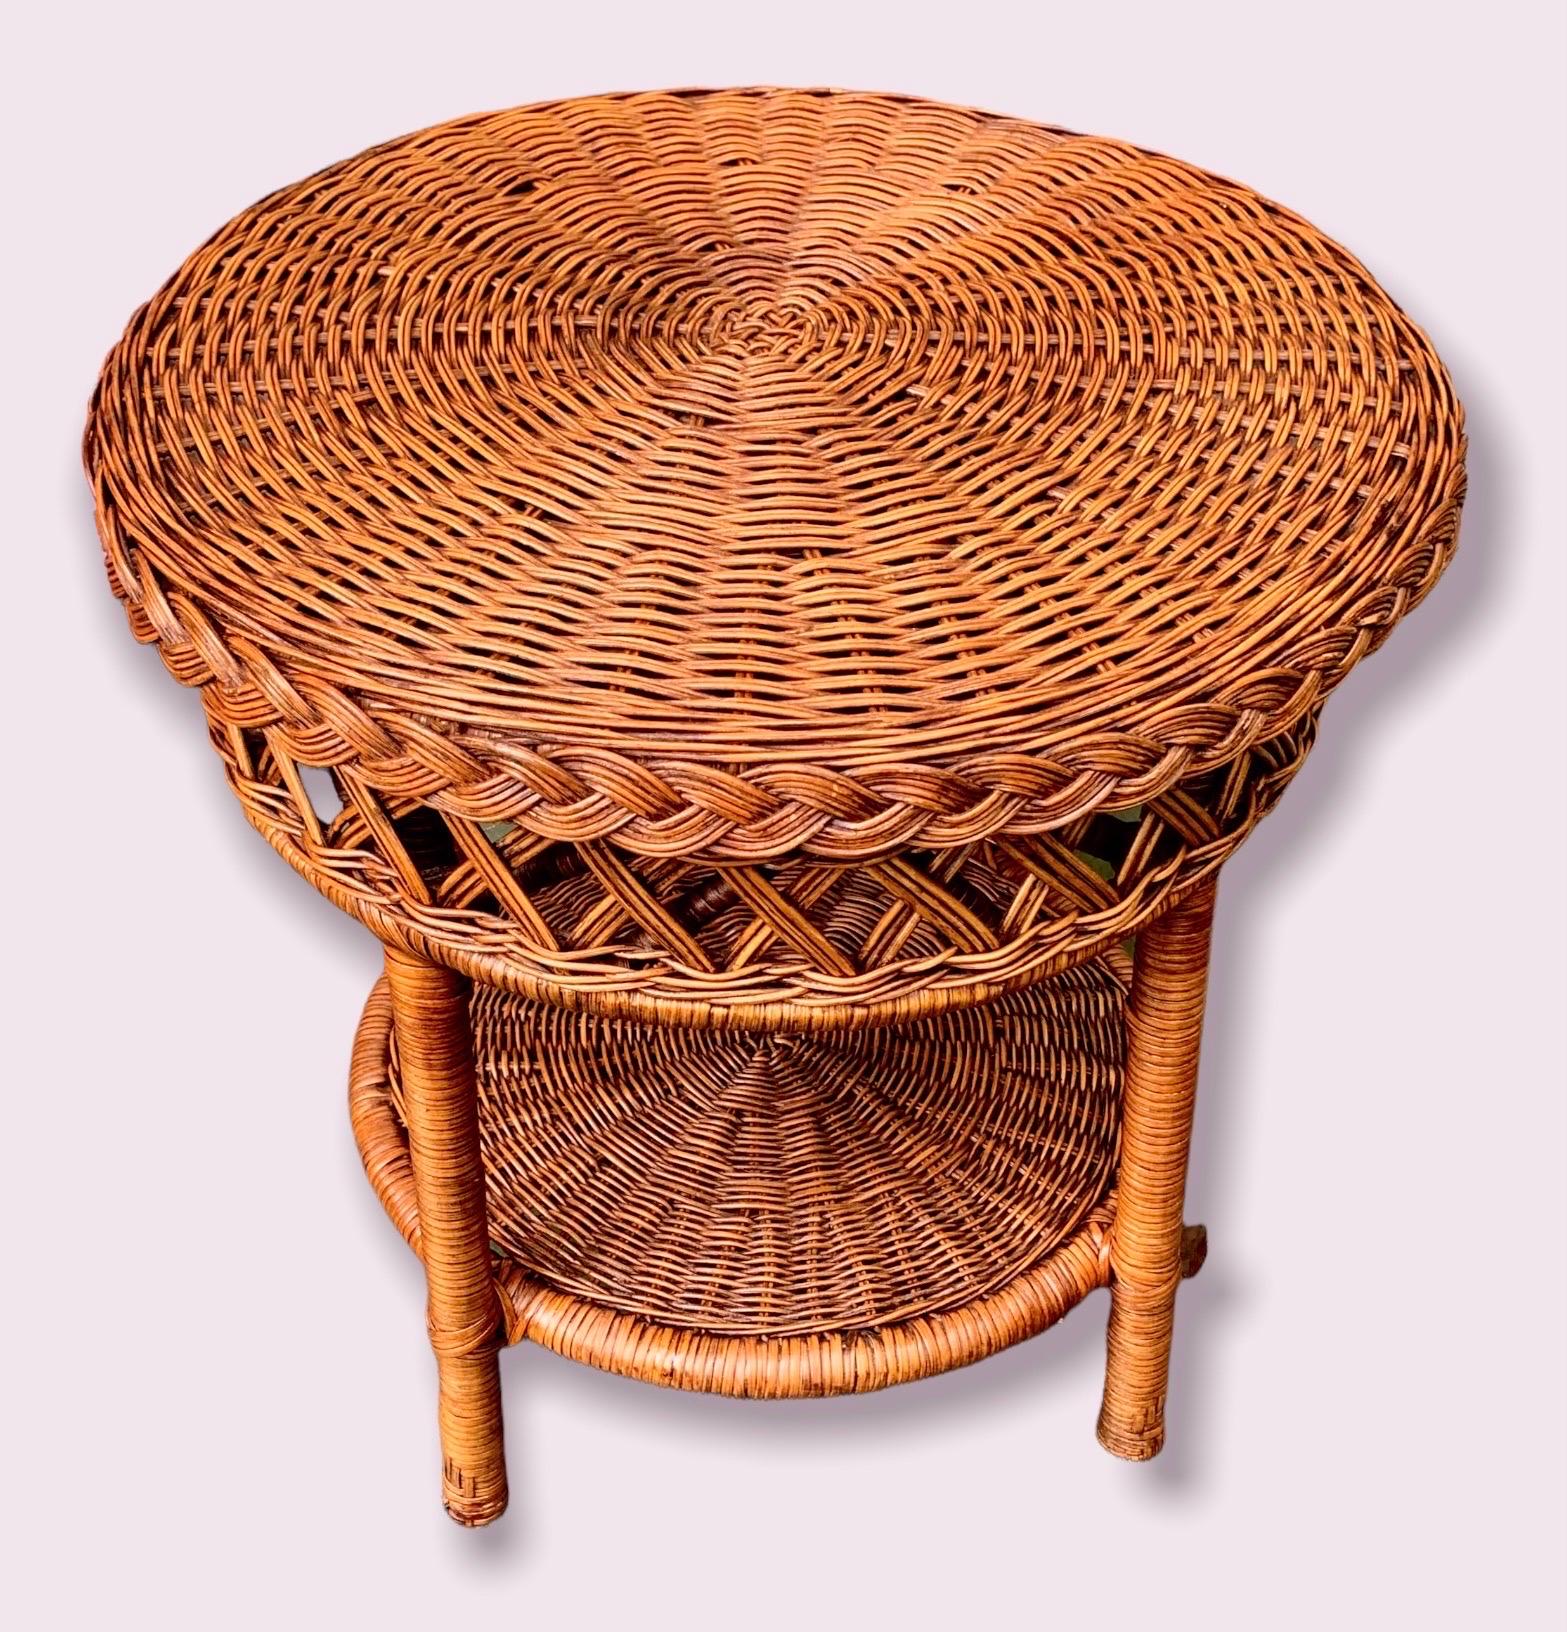 A high quality, vintage 1970’s hand woven wicker over rattan round end/side table with one lower shelf. Ready to enjoy beside your favorite reading chair or sofa and to add an earthy touch to your existing fabrics and finishes, as it meshes well